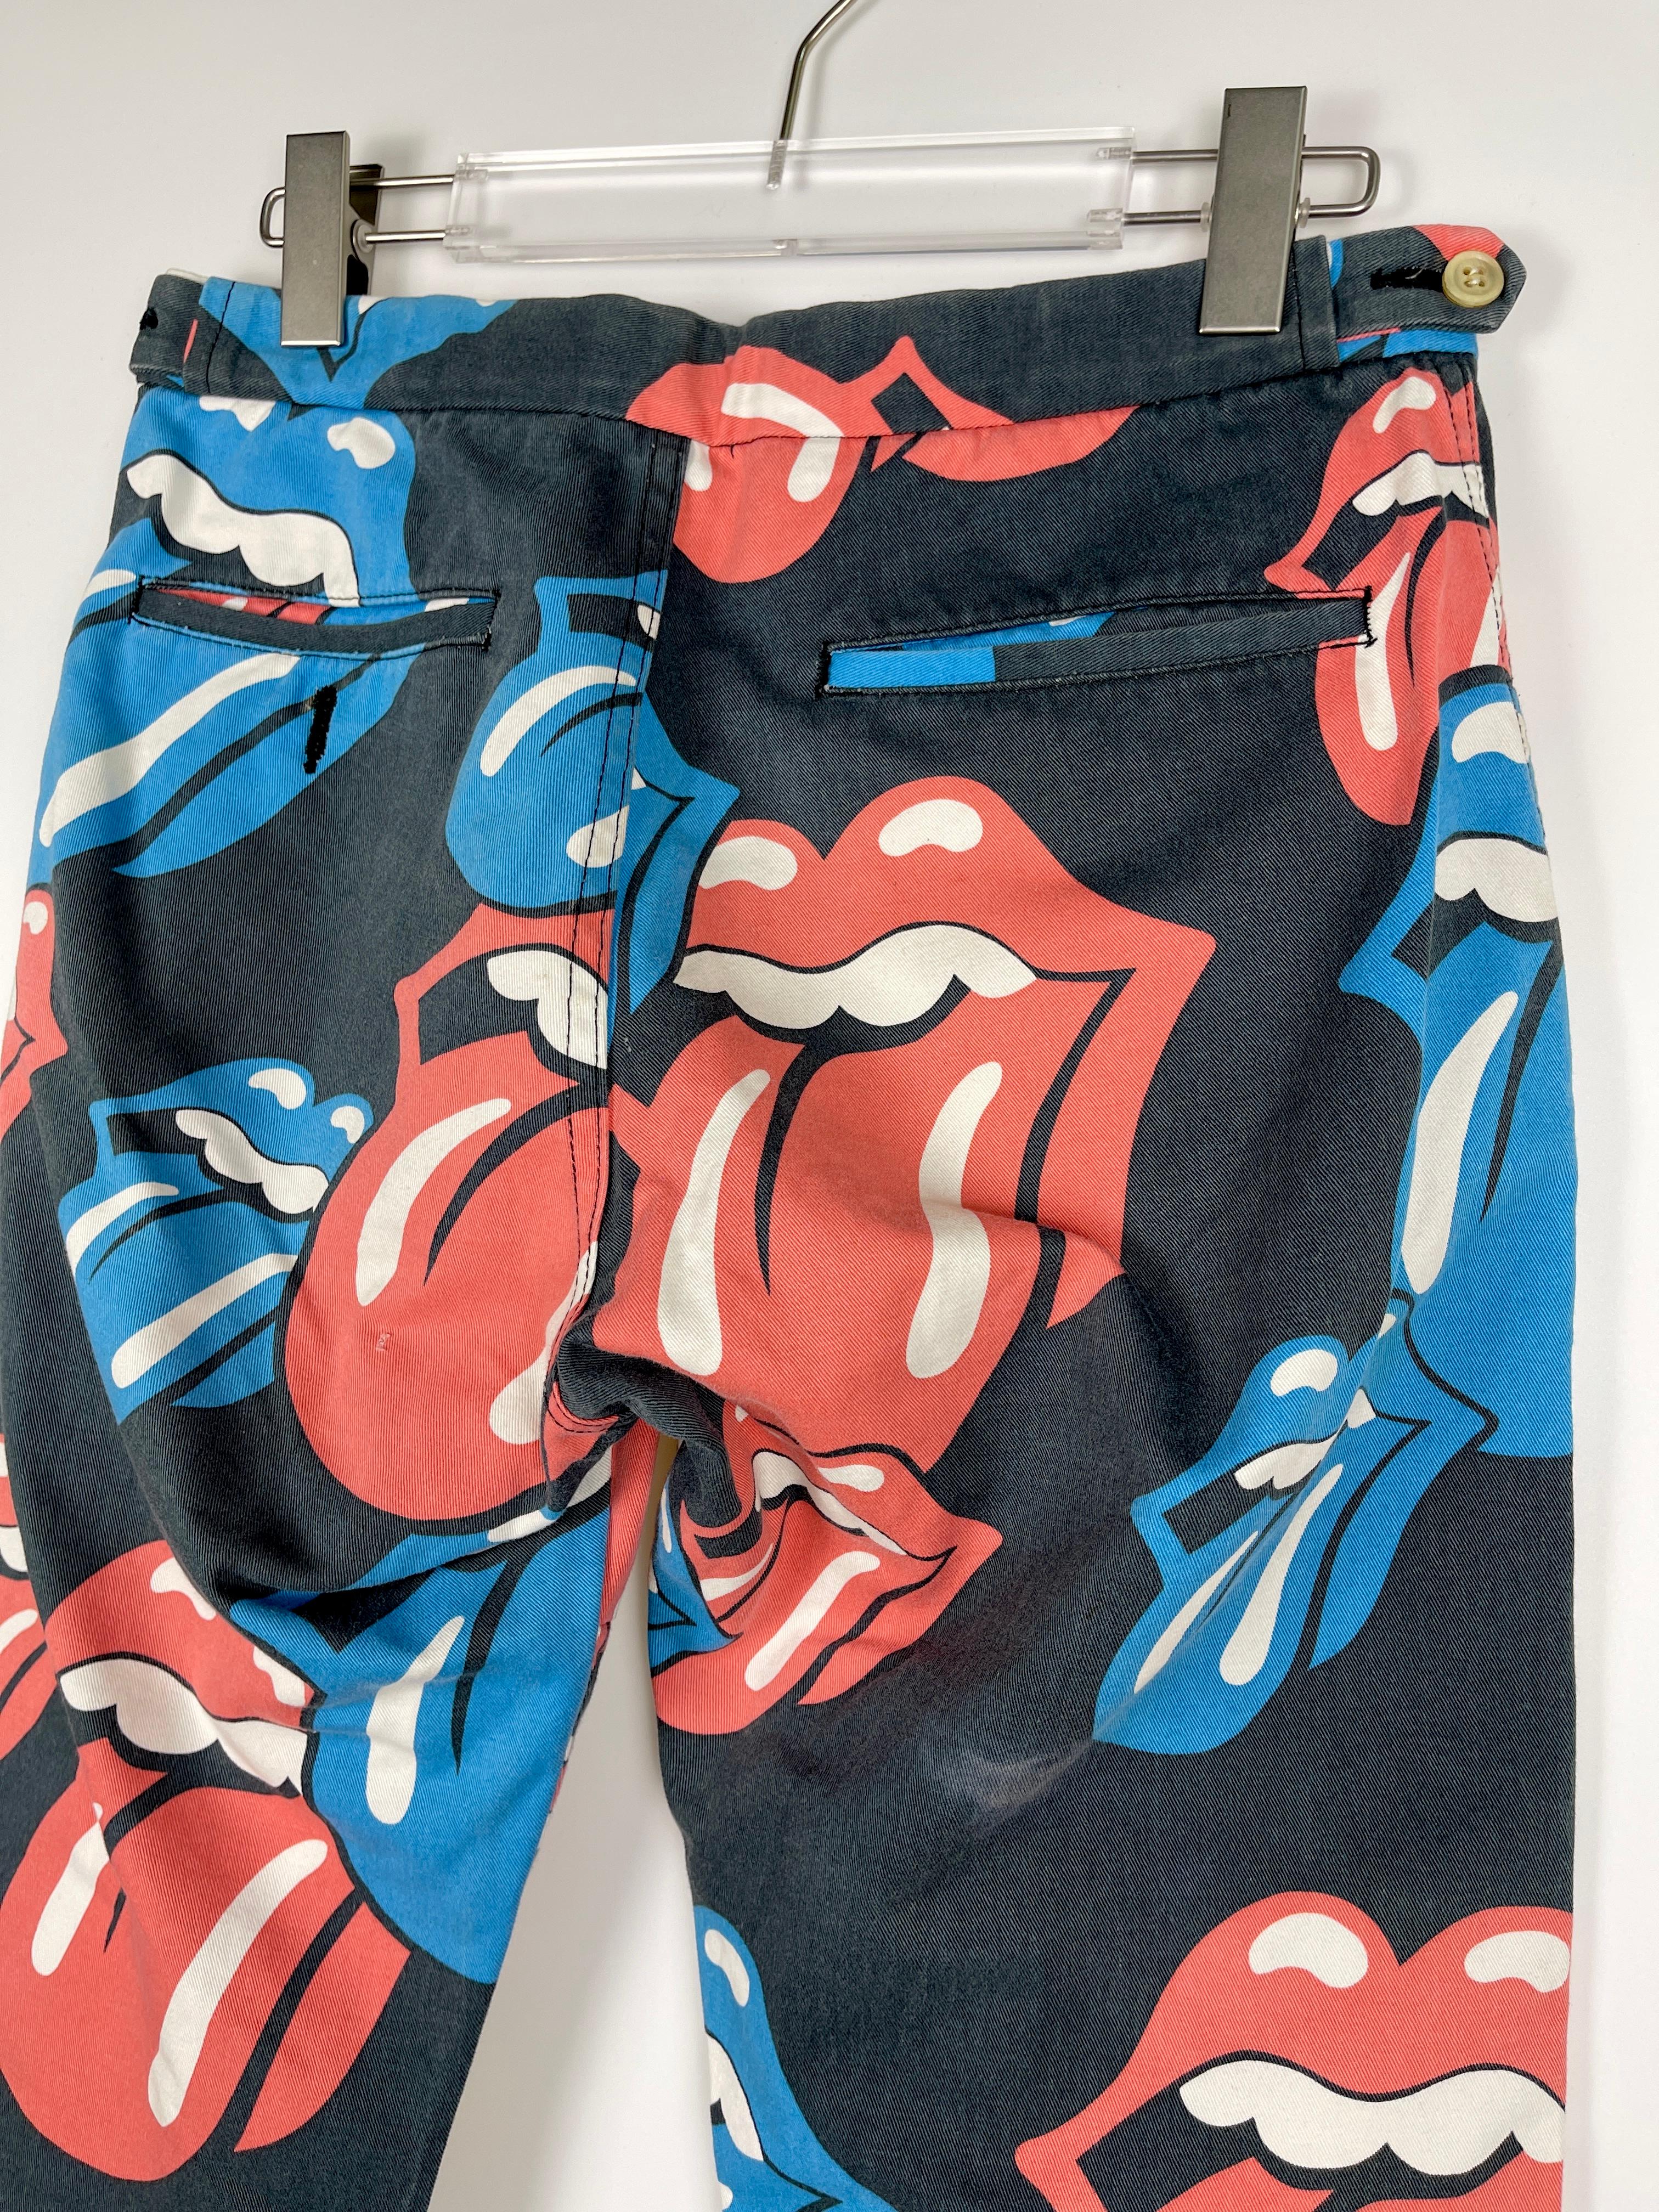 Comme des Garcons Homme Plus S/S2006 Lips Pants In Excellent Condition For Sale In Seattle, WA